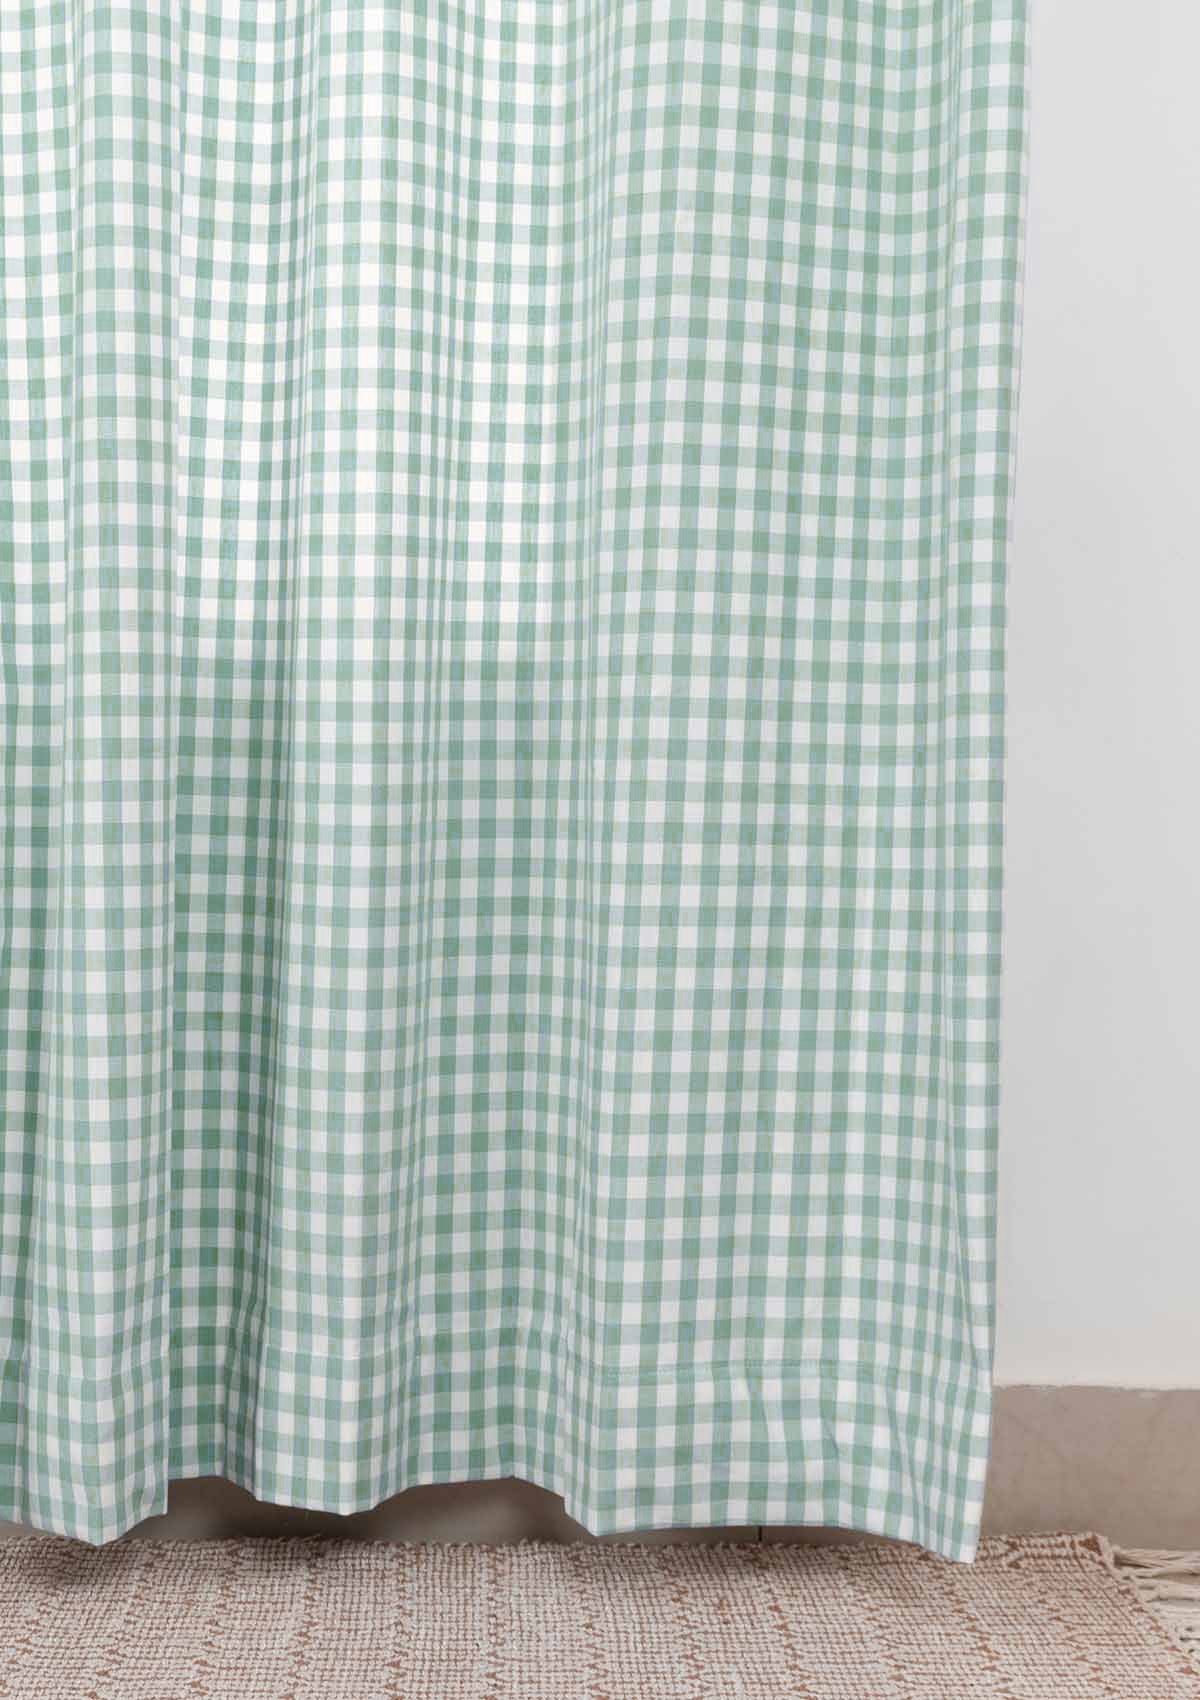 Gingham Woven 100% Customizable cotton geometric curtain for living room - Room darkening - Sage Green